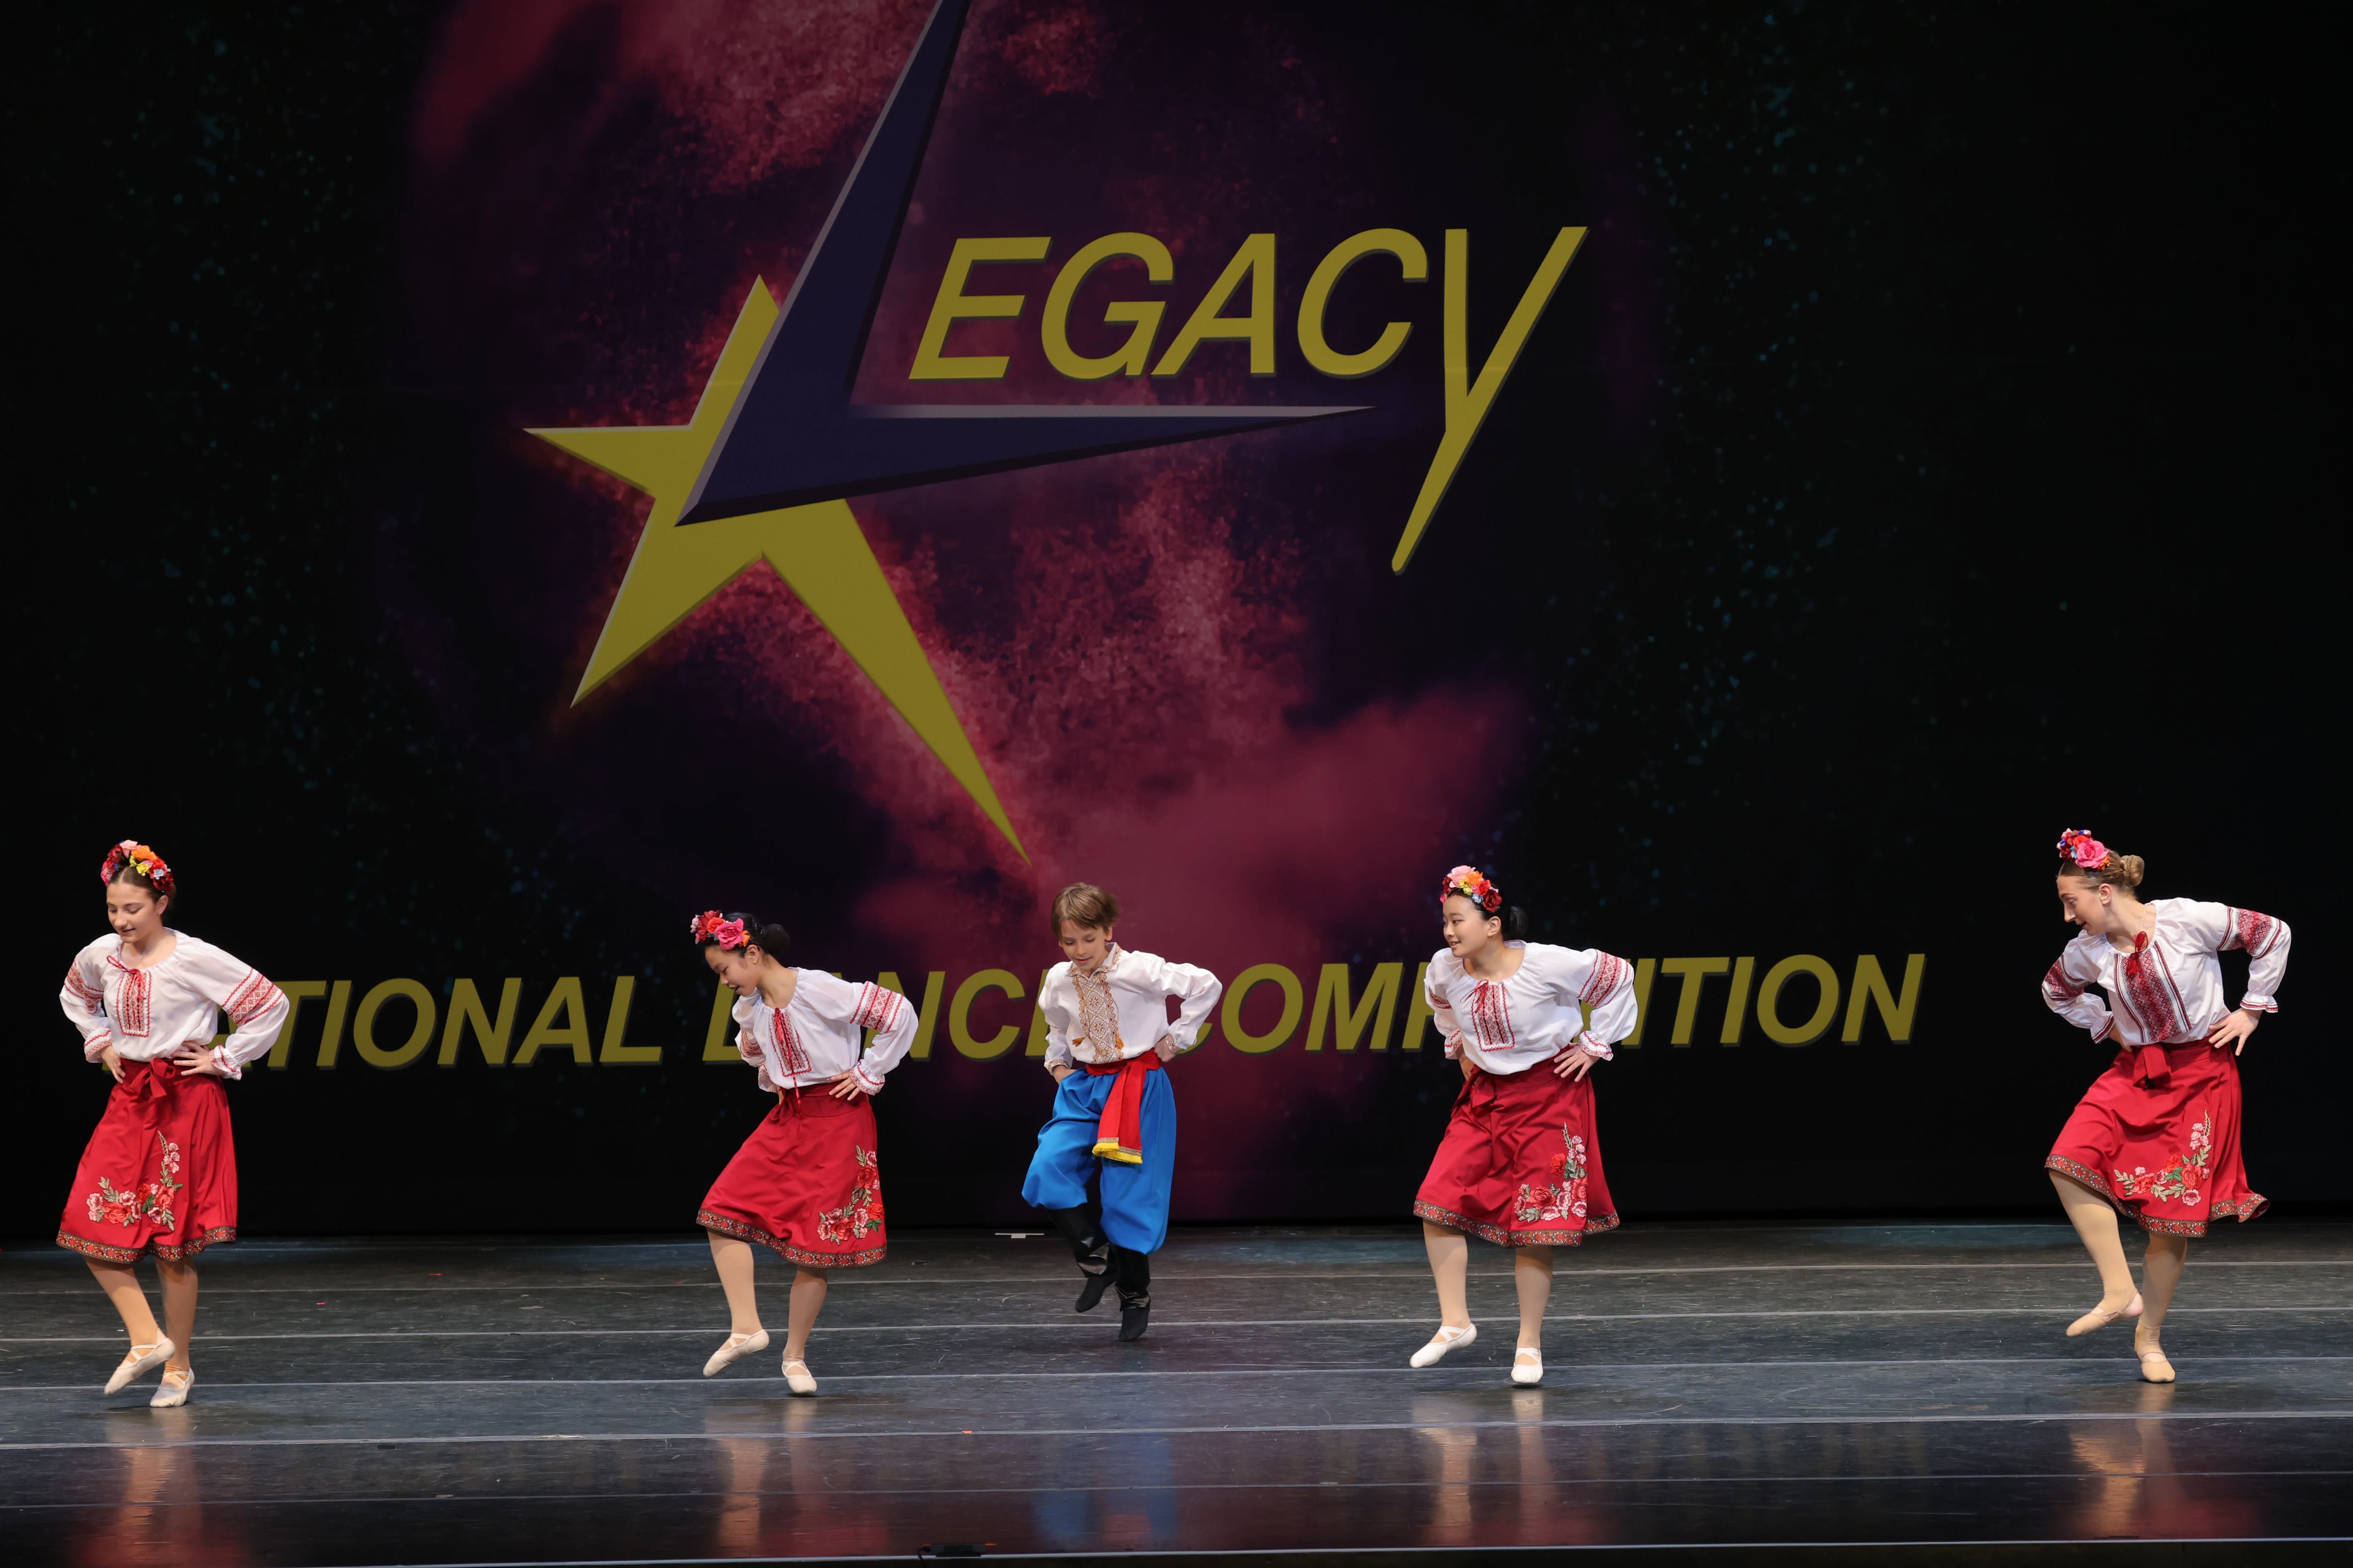 Hopak at the Legacy National Dance Competition